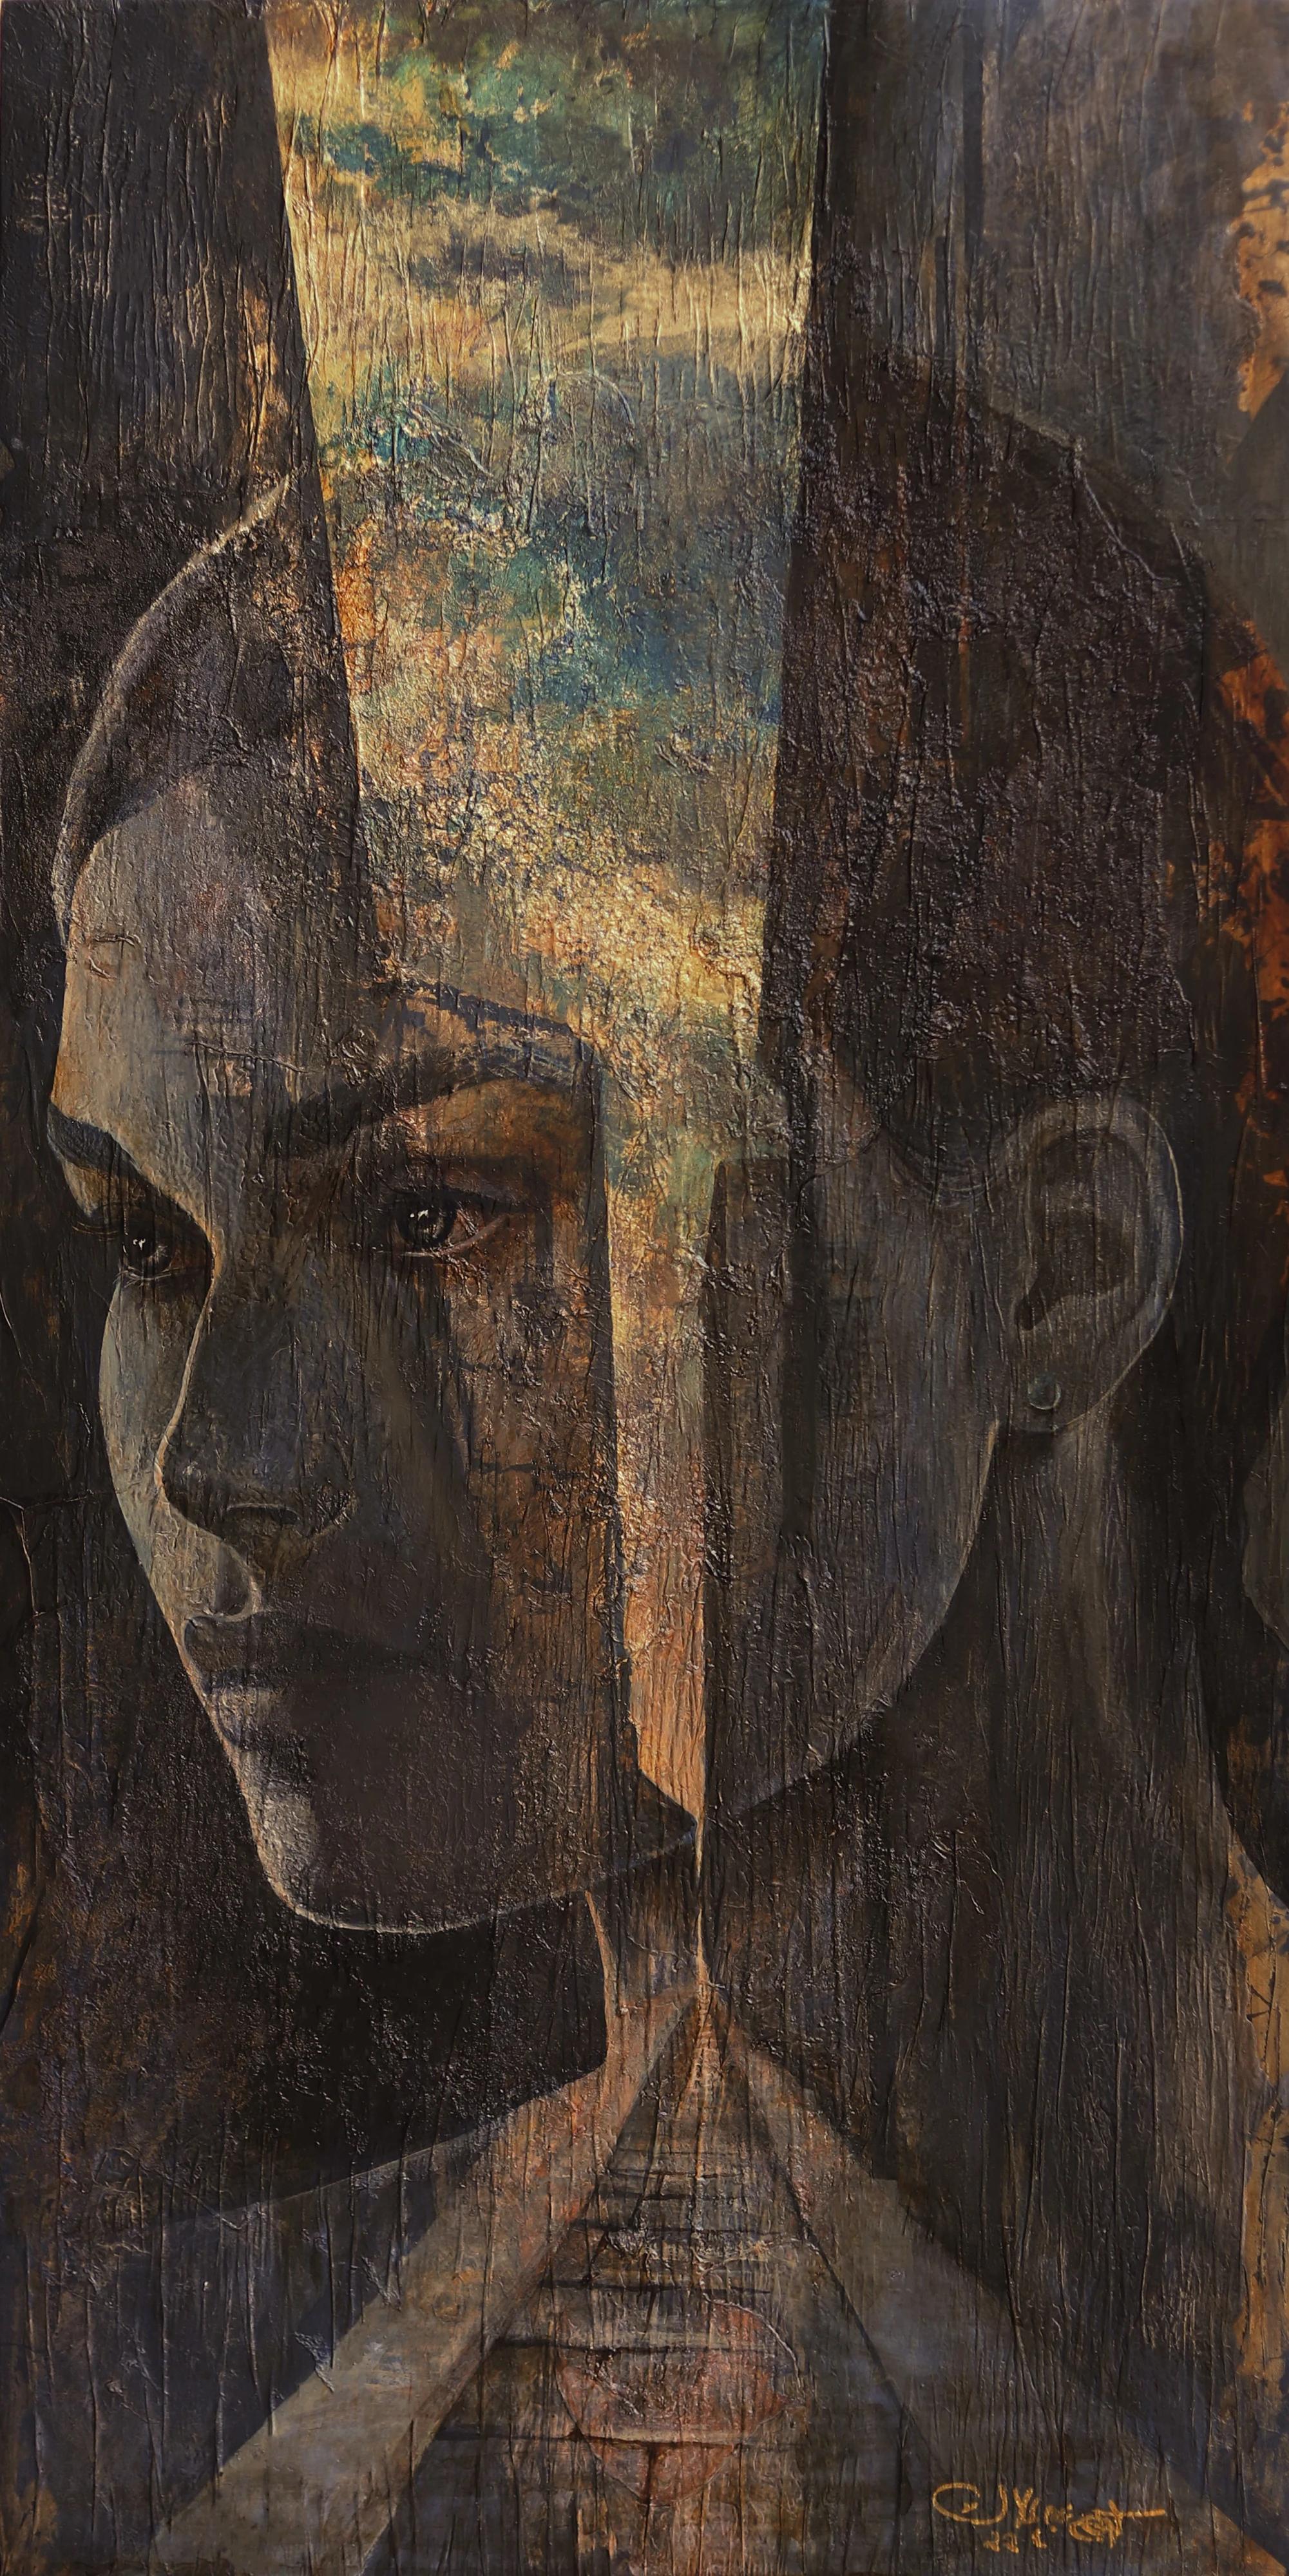 "Womanhood" Painting 47" x 24" inch by Karim Abd Elmalak

Karim Abdel Malak's layered multi-media works are influenced by the old masters. 
Abdel Malak textured oils are a celebration of the female identity in every sense of the word. His beautiful